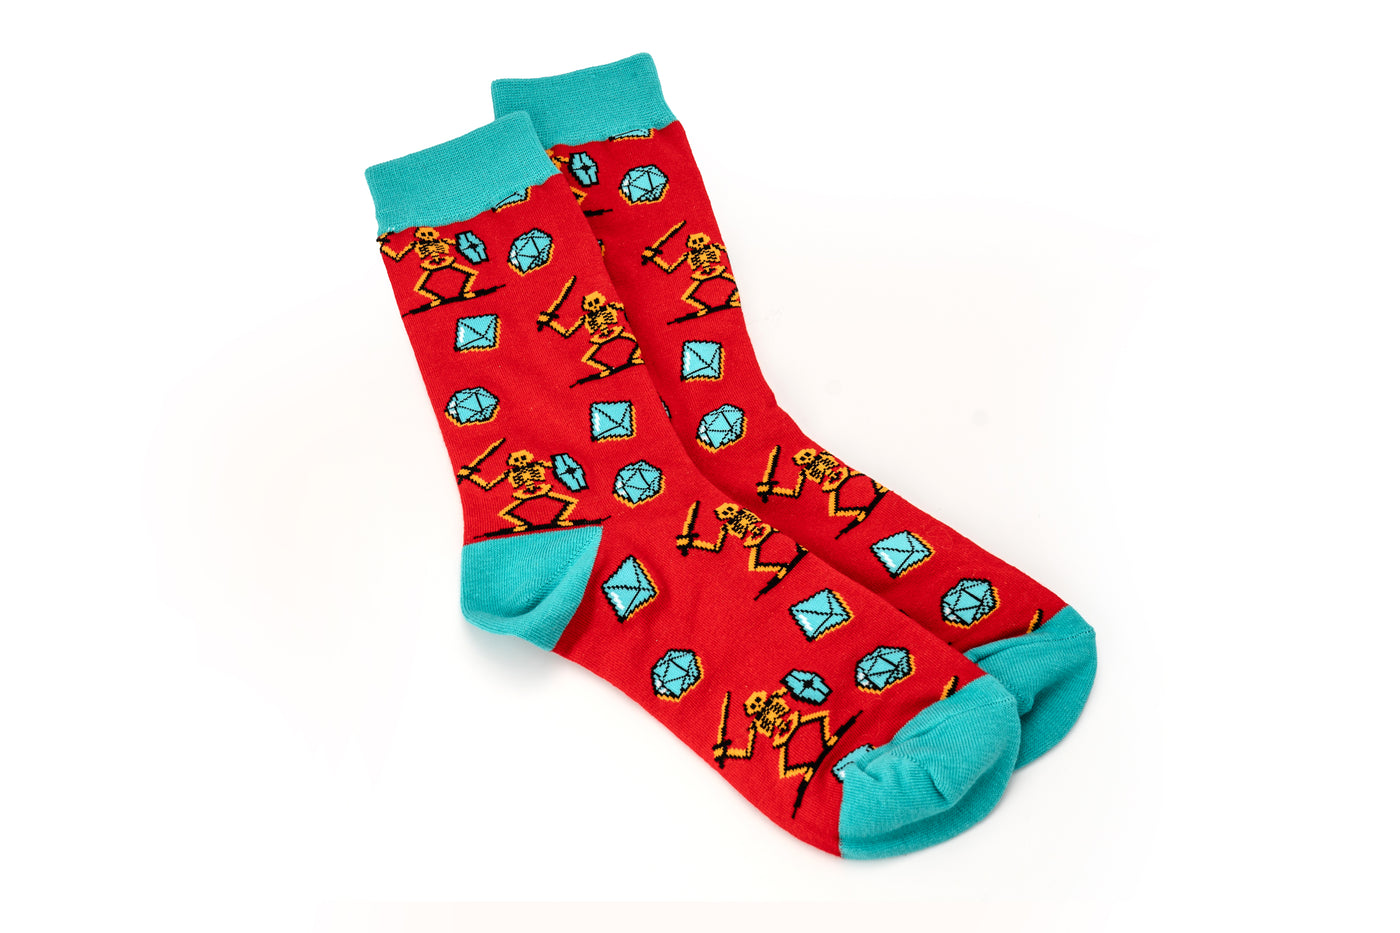 Polyhedral Dice Patterned Socks Collection: Dragon, Goblin, Skeleton - Comfy Cotton Blend, Fun & Unique - TTRPG Fan Christmas Gift!